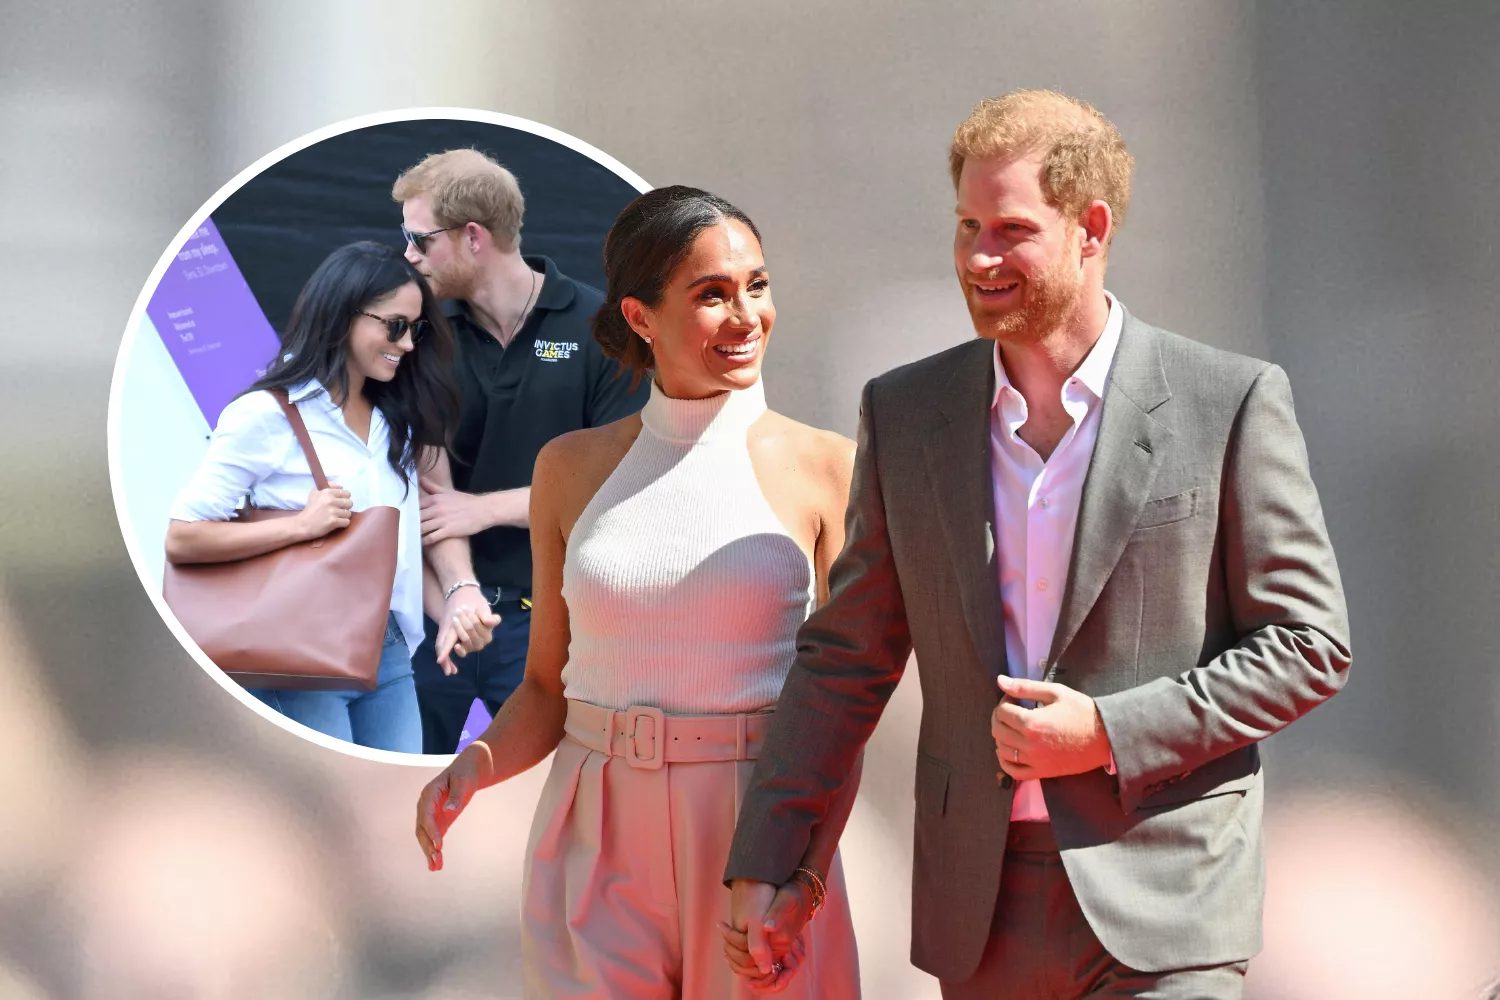 Prince Harry shares he can never leave Meghan Markle: ‘ain't moving’, Harry is due to attend a special ceremony in London on May 8 to attend Invictus Games